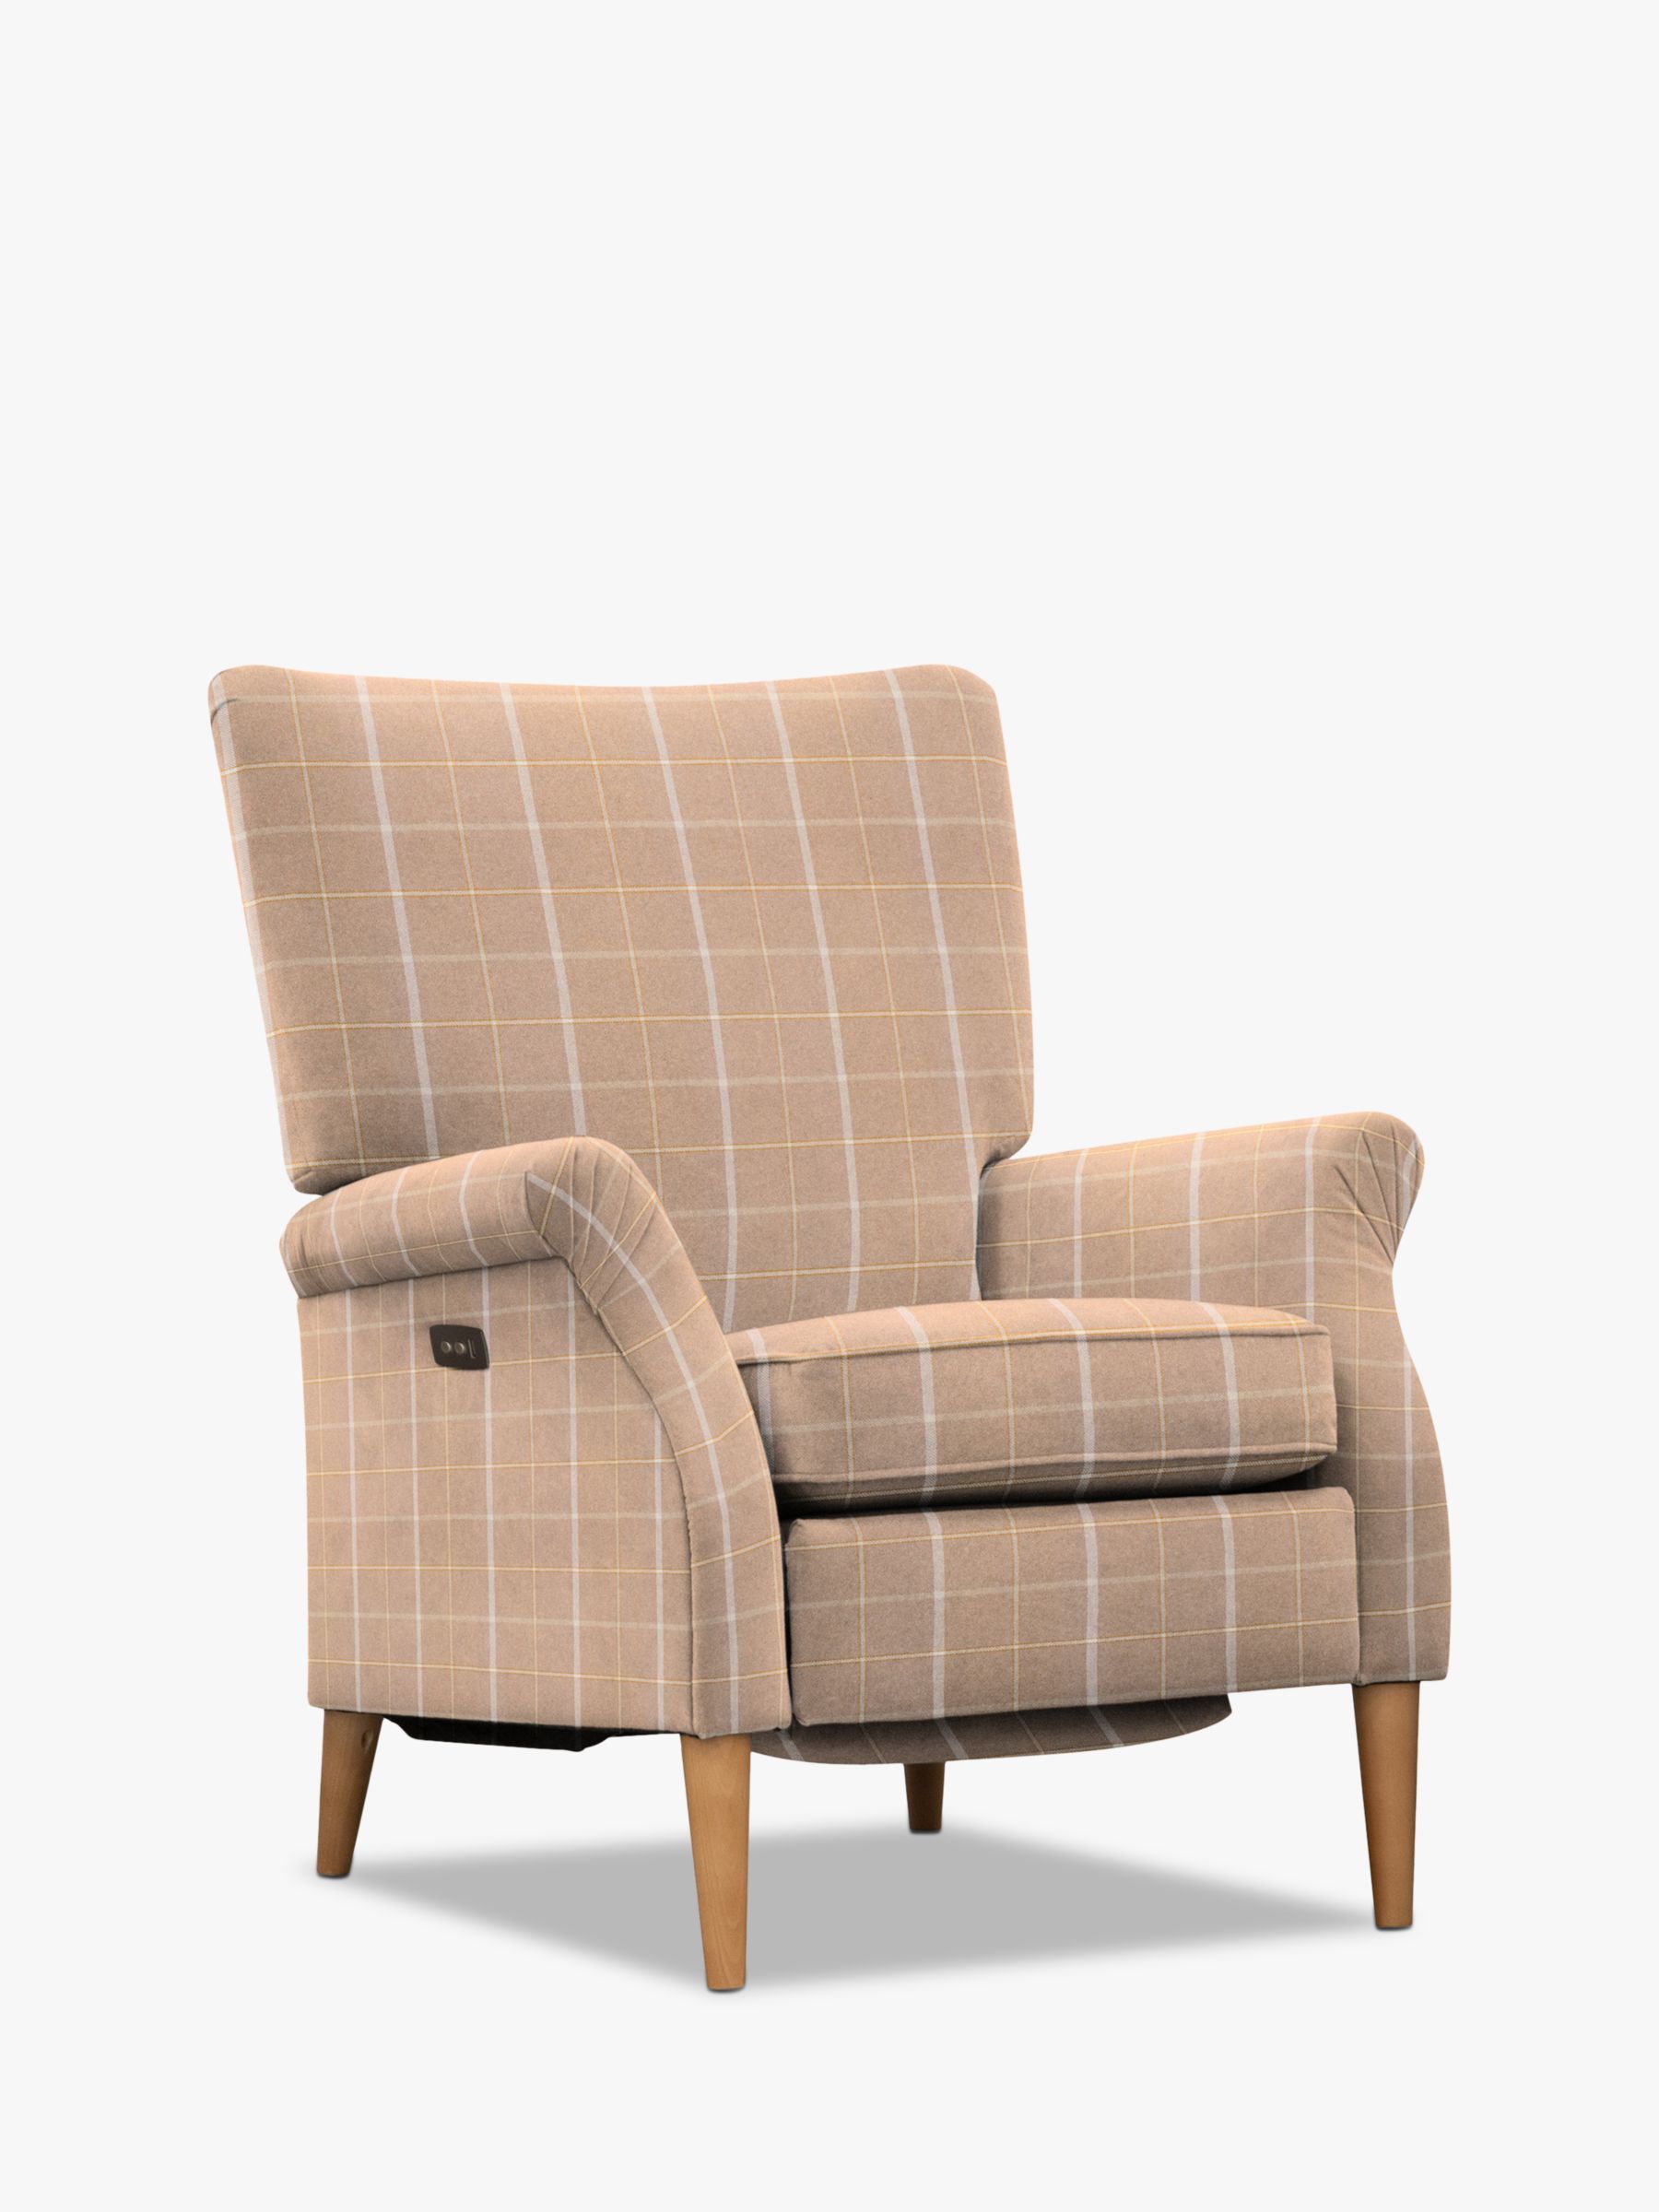 Classic Motion Range, Parker Knoll Classic Motion Recliner High Back Armchair, Berwick Check Natural